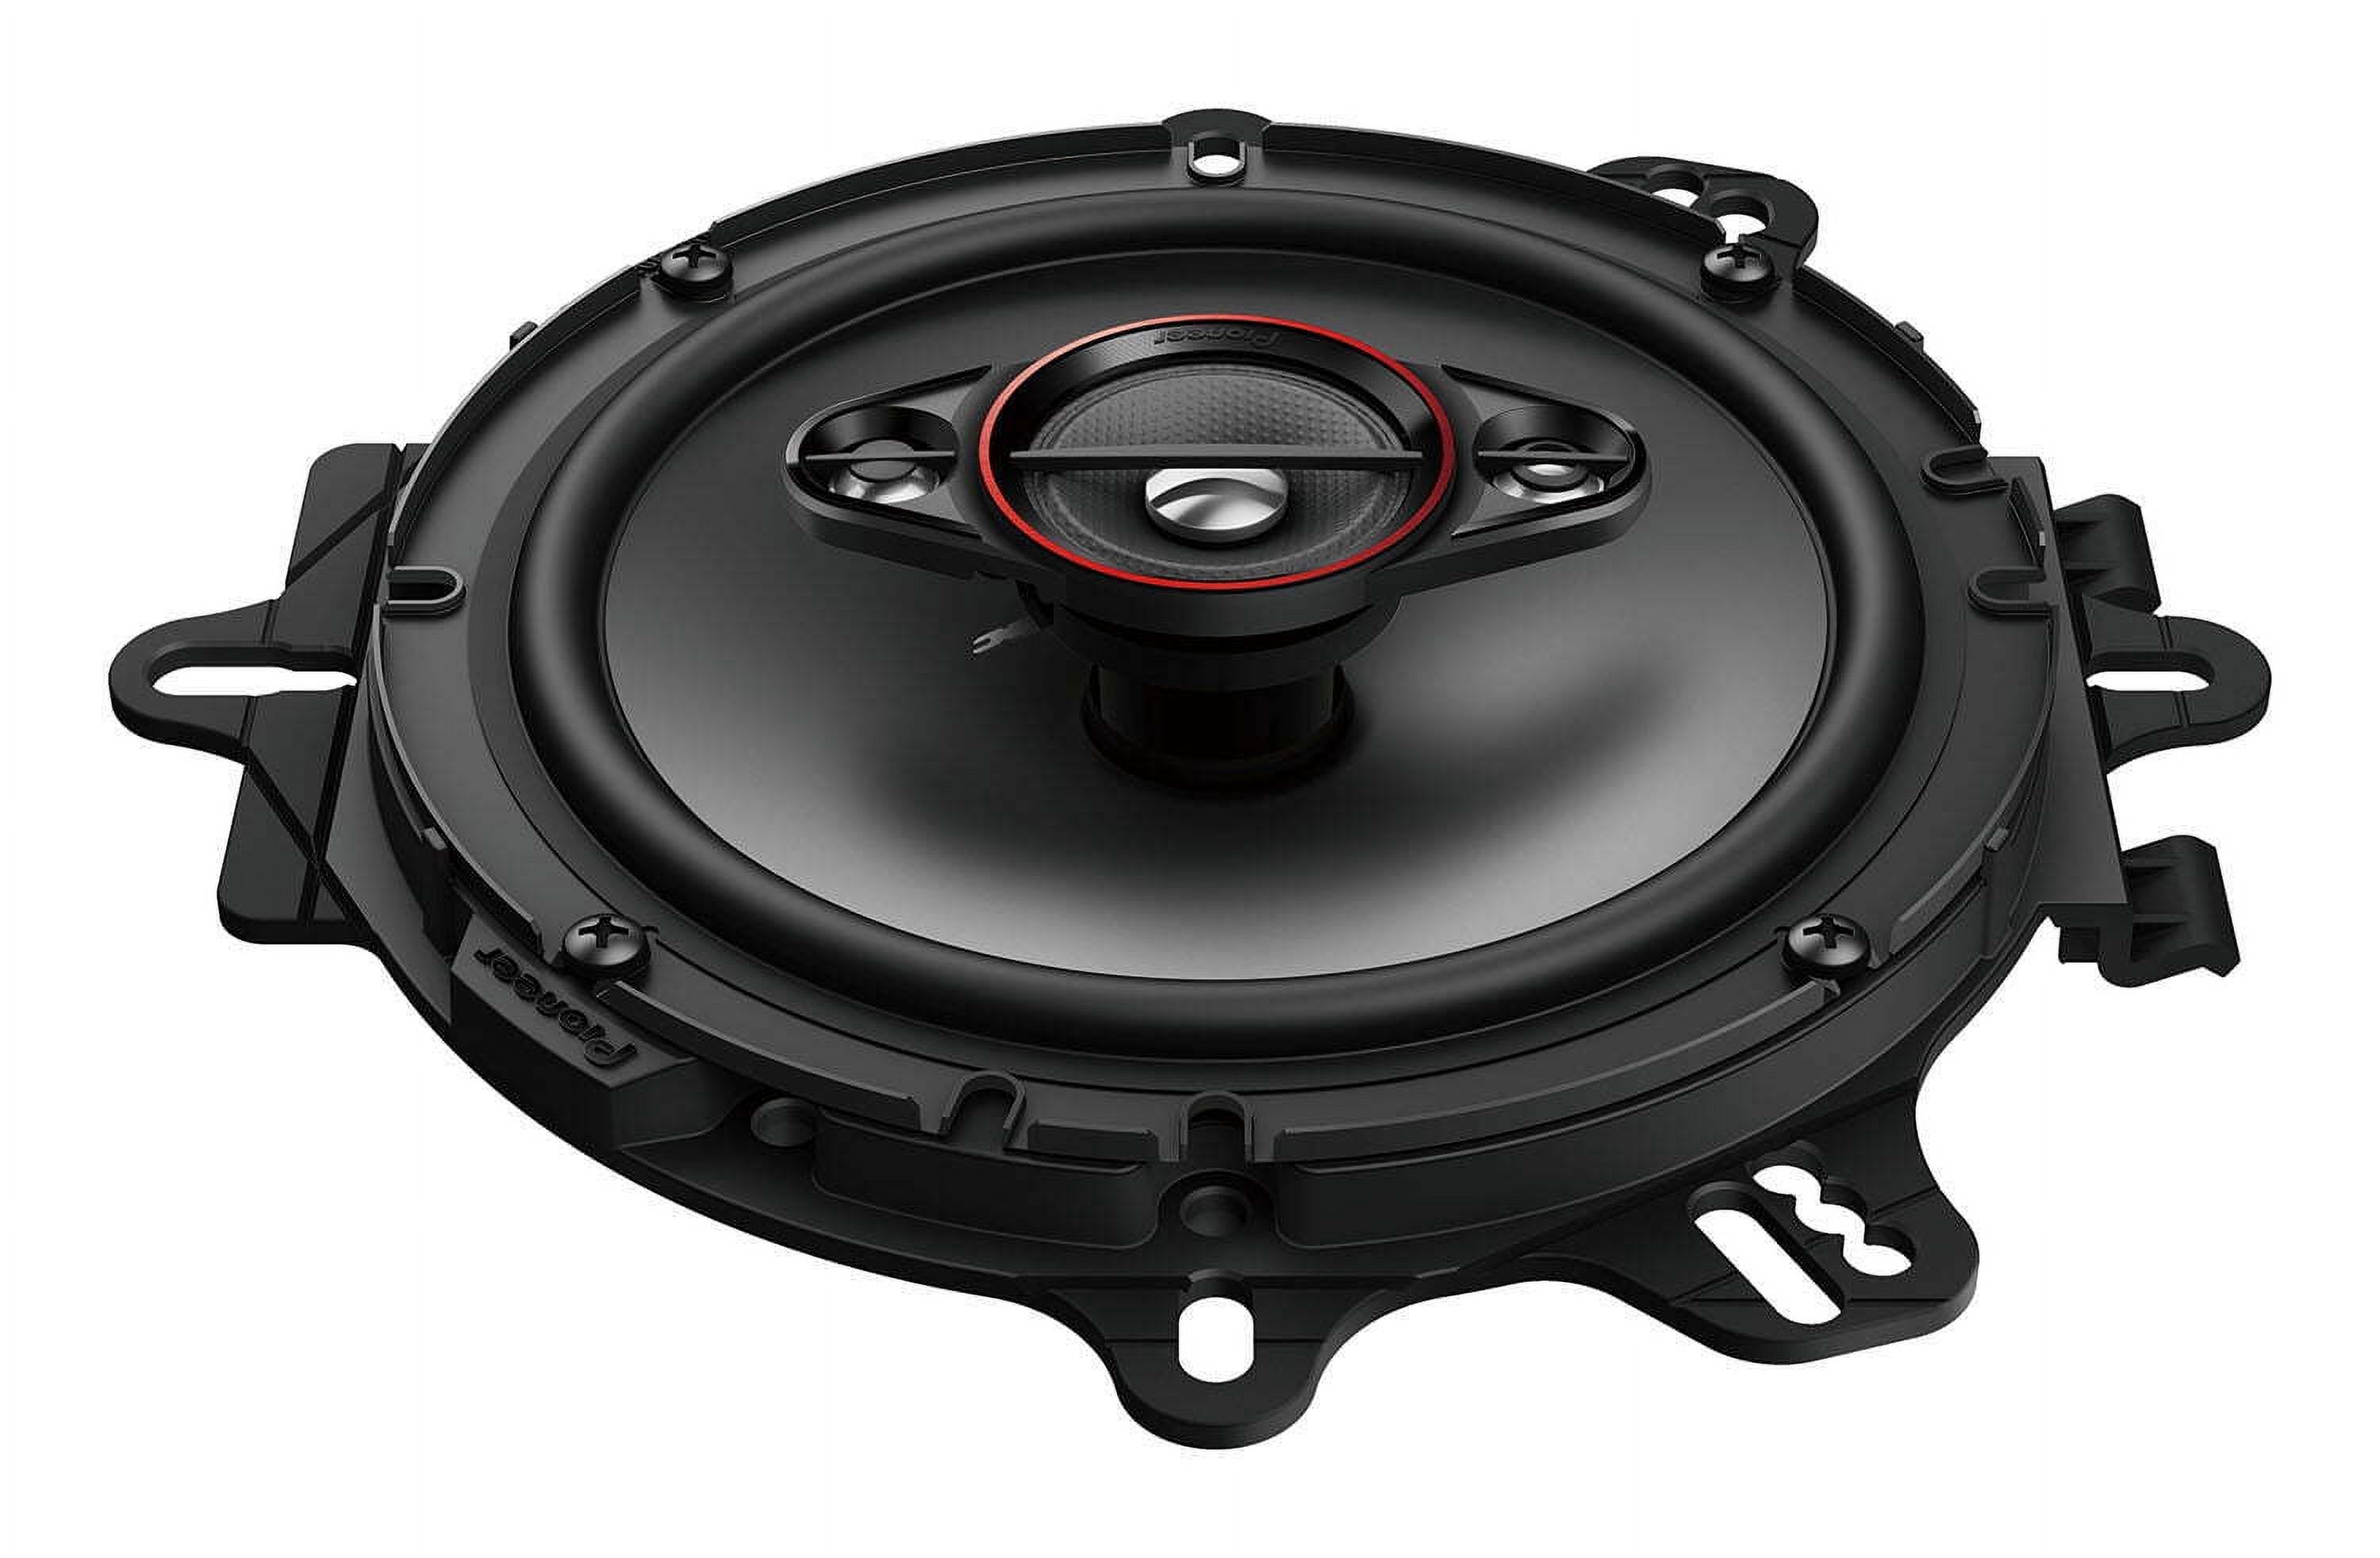 Pioneer TS-600M 6-1/2" 4-Way Full Range Coaxial Car Stereo Speakers, 320W Max Power - image 4 of 5